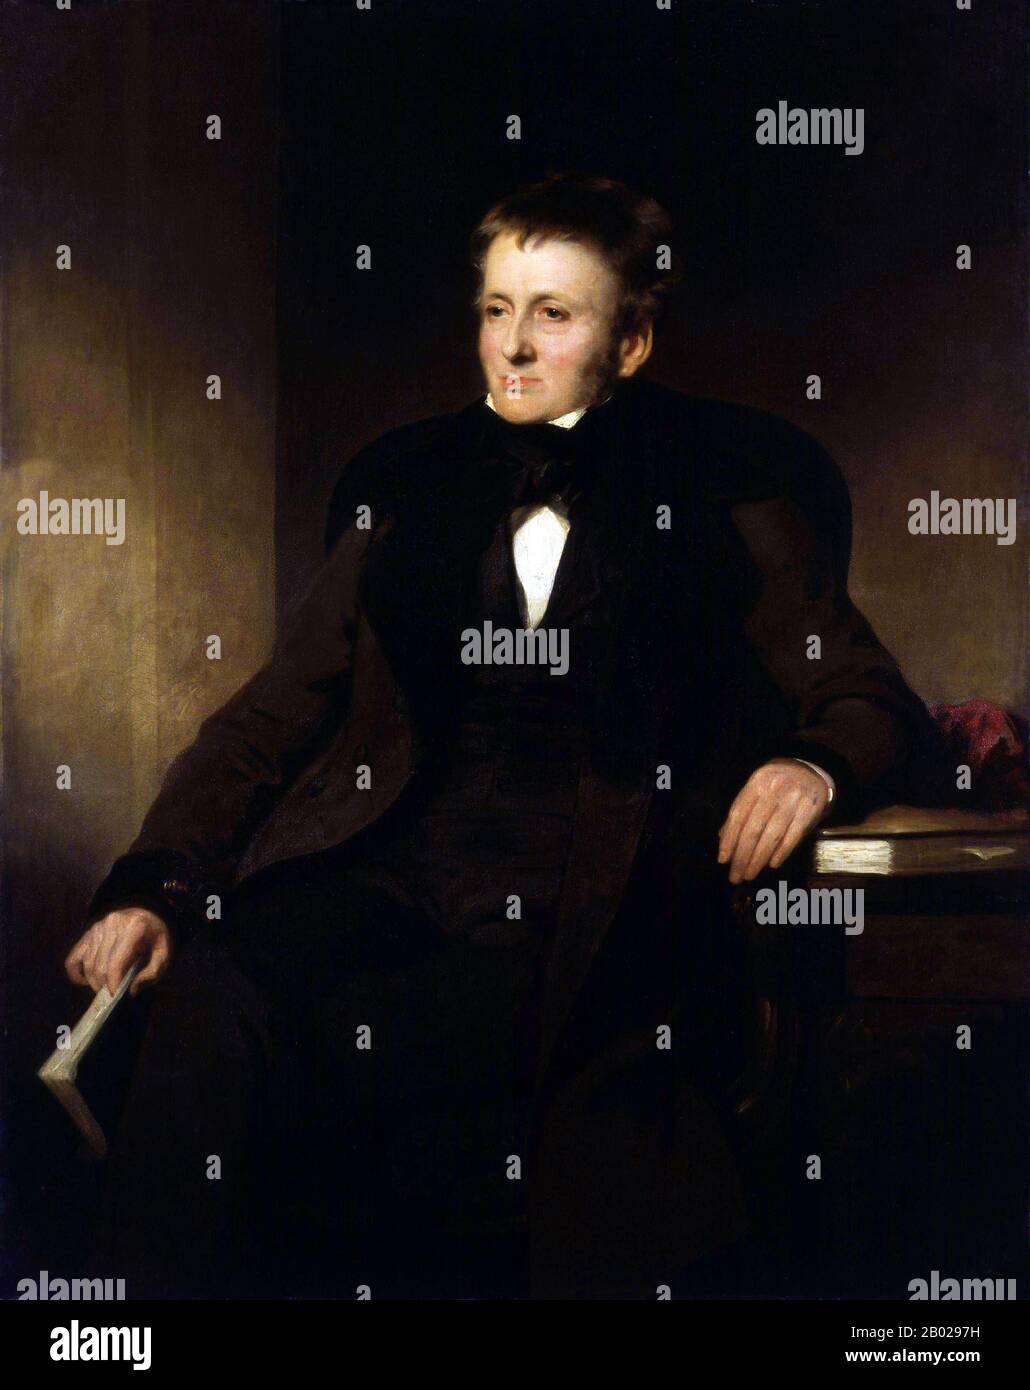 By his own testimony, De Quincey first used opium in 1804 to relieve his neuralgia; he used it for pleasure, but no more than weekly, through 1812. It was in 1813 that he first commenced daily usage, in response to illness and his grief over the death of Wordsworth's young daughter Catherine.   In the periods of 1813–16 and 1817–19 his daily dose was very high, and resulted in the sufferings recounted in the final sections of his Confessions. For the rest of his life his opium use fluctuated between extremes; he took 'enormous doses' in 1843, but late in 1848 he went for 61 days with none at a Stock Photo